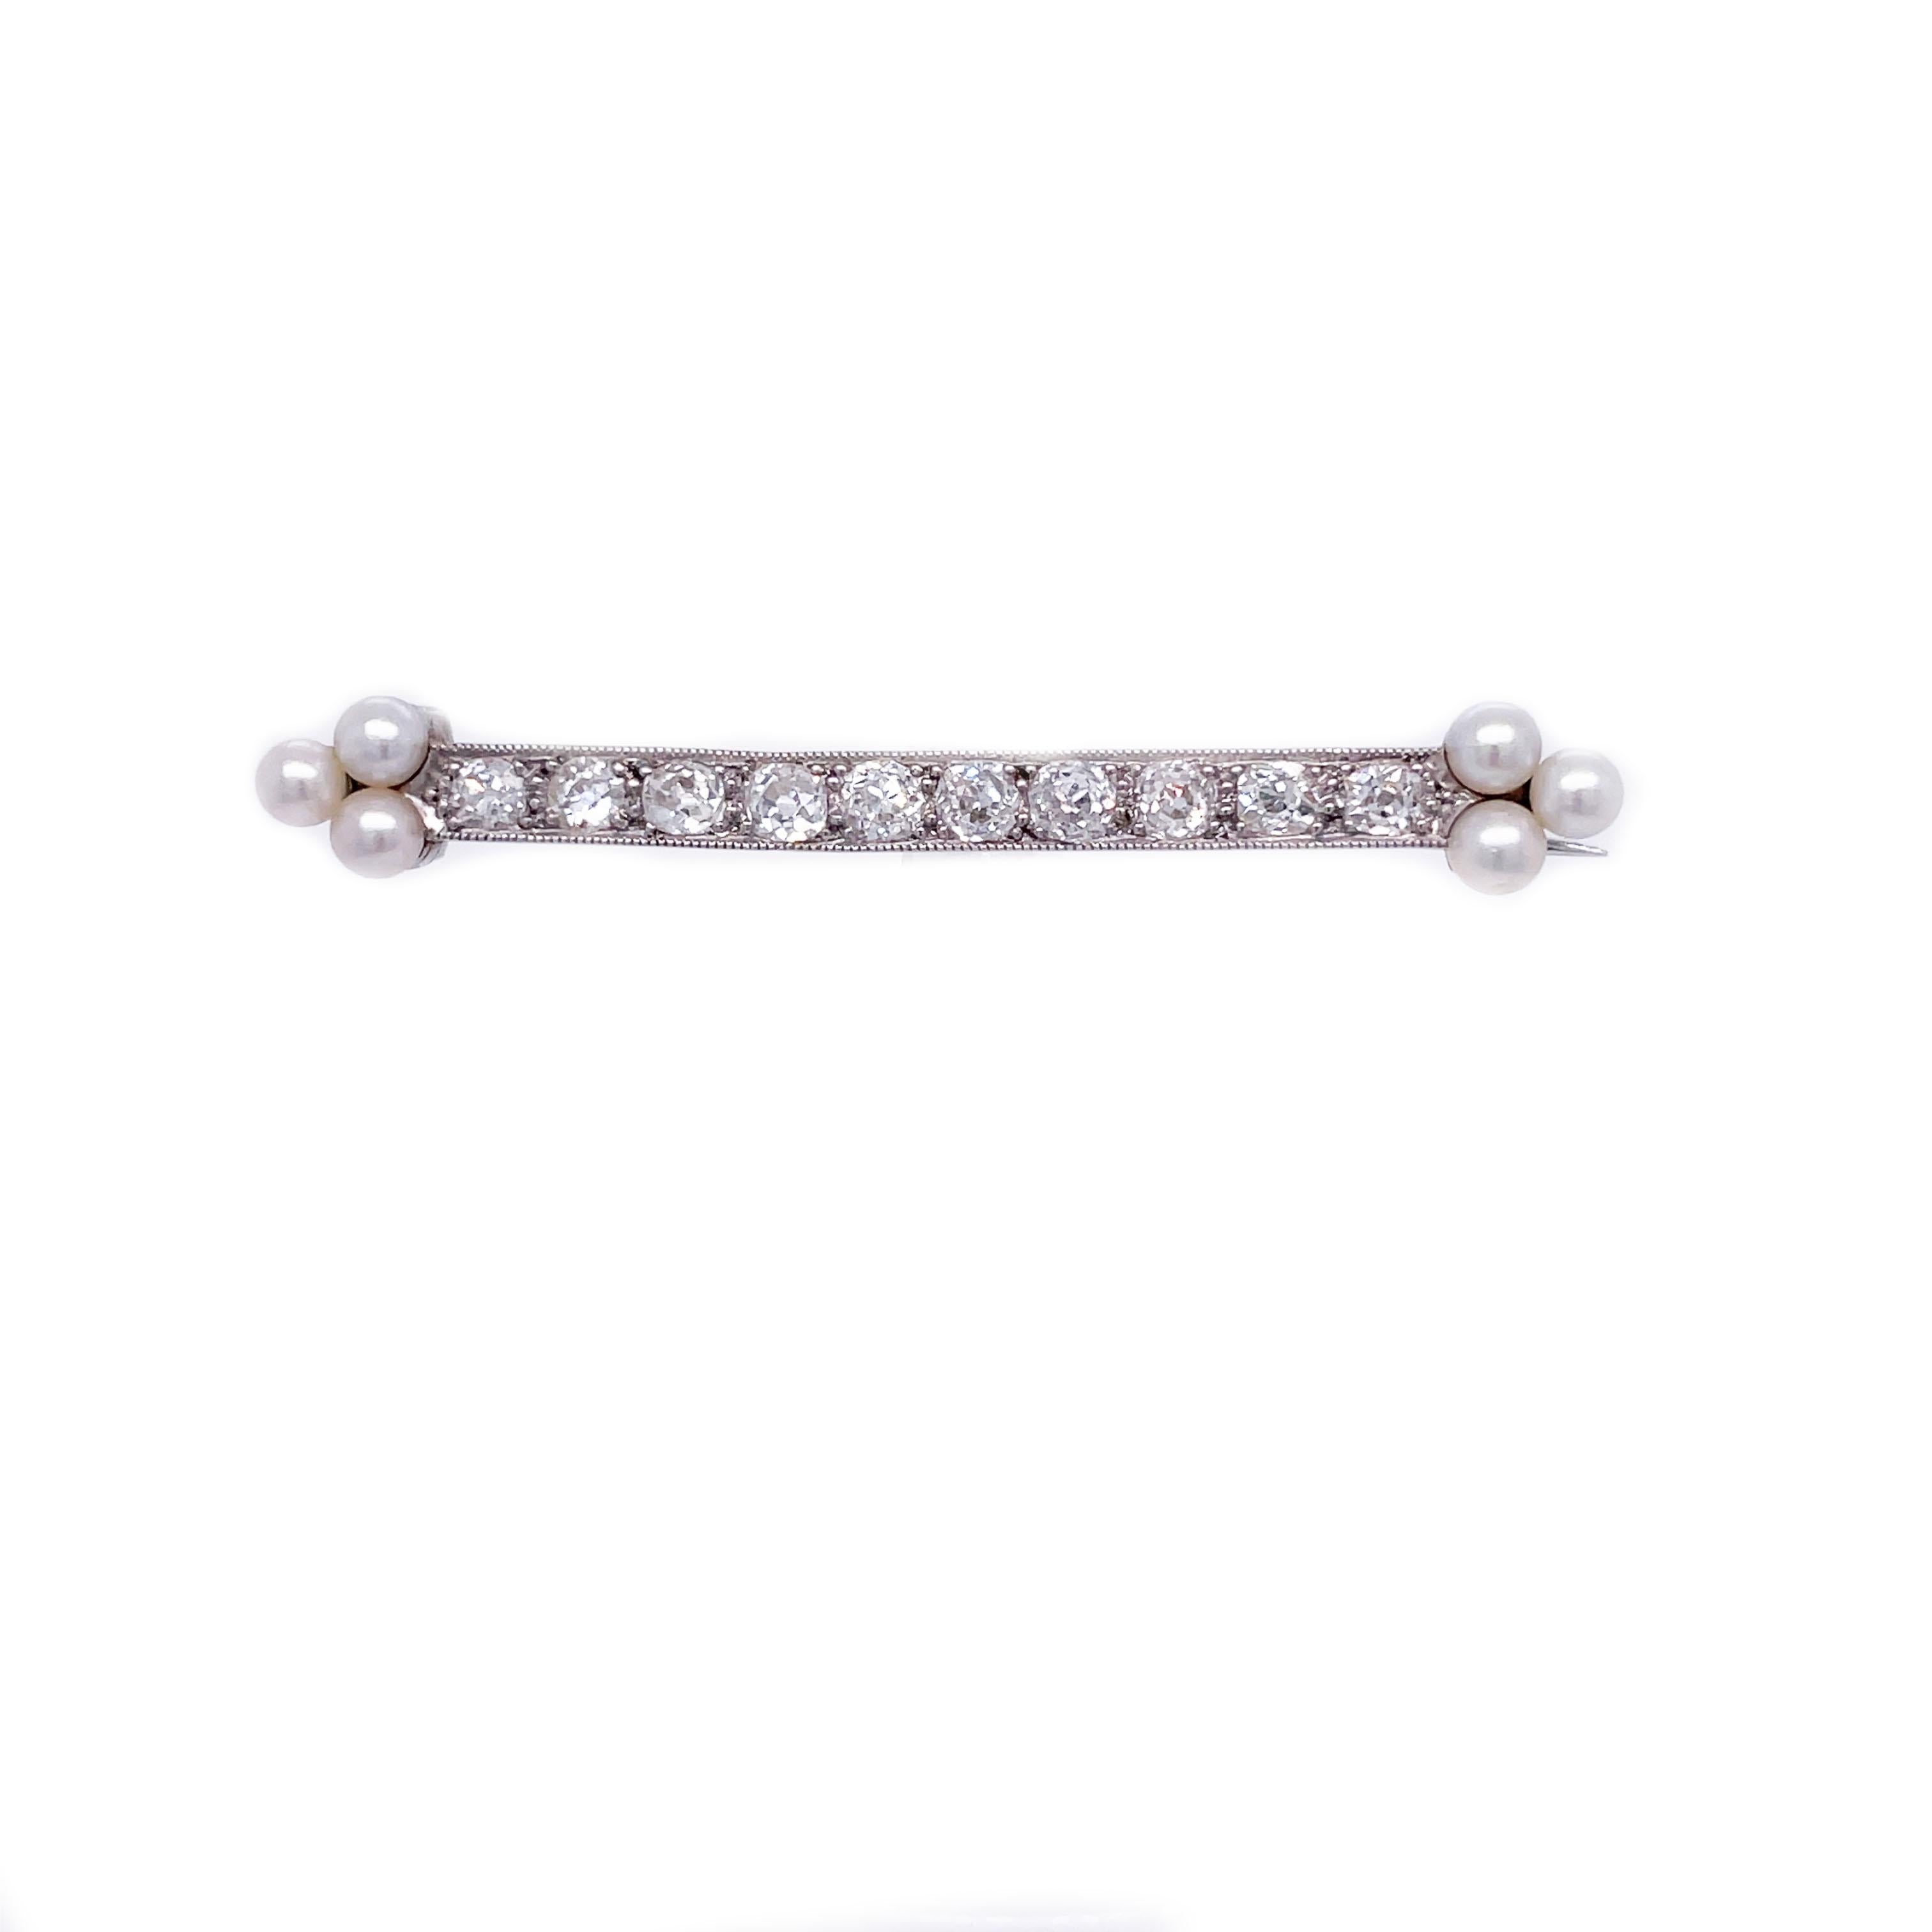 This is a dreamy brooch dating back to the Edwardian period crafted in Platinum that showcases bright white pearls and diamonds! This is a stunning bar pin that is classic and timeless. This lovely pin is adorned with 10 gleaming old mine-cut